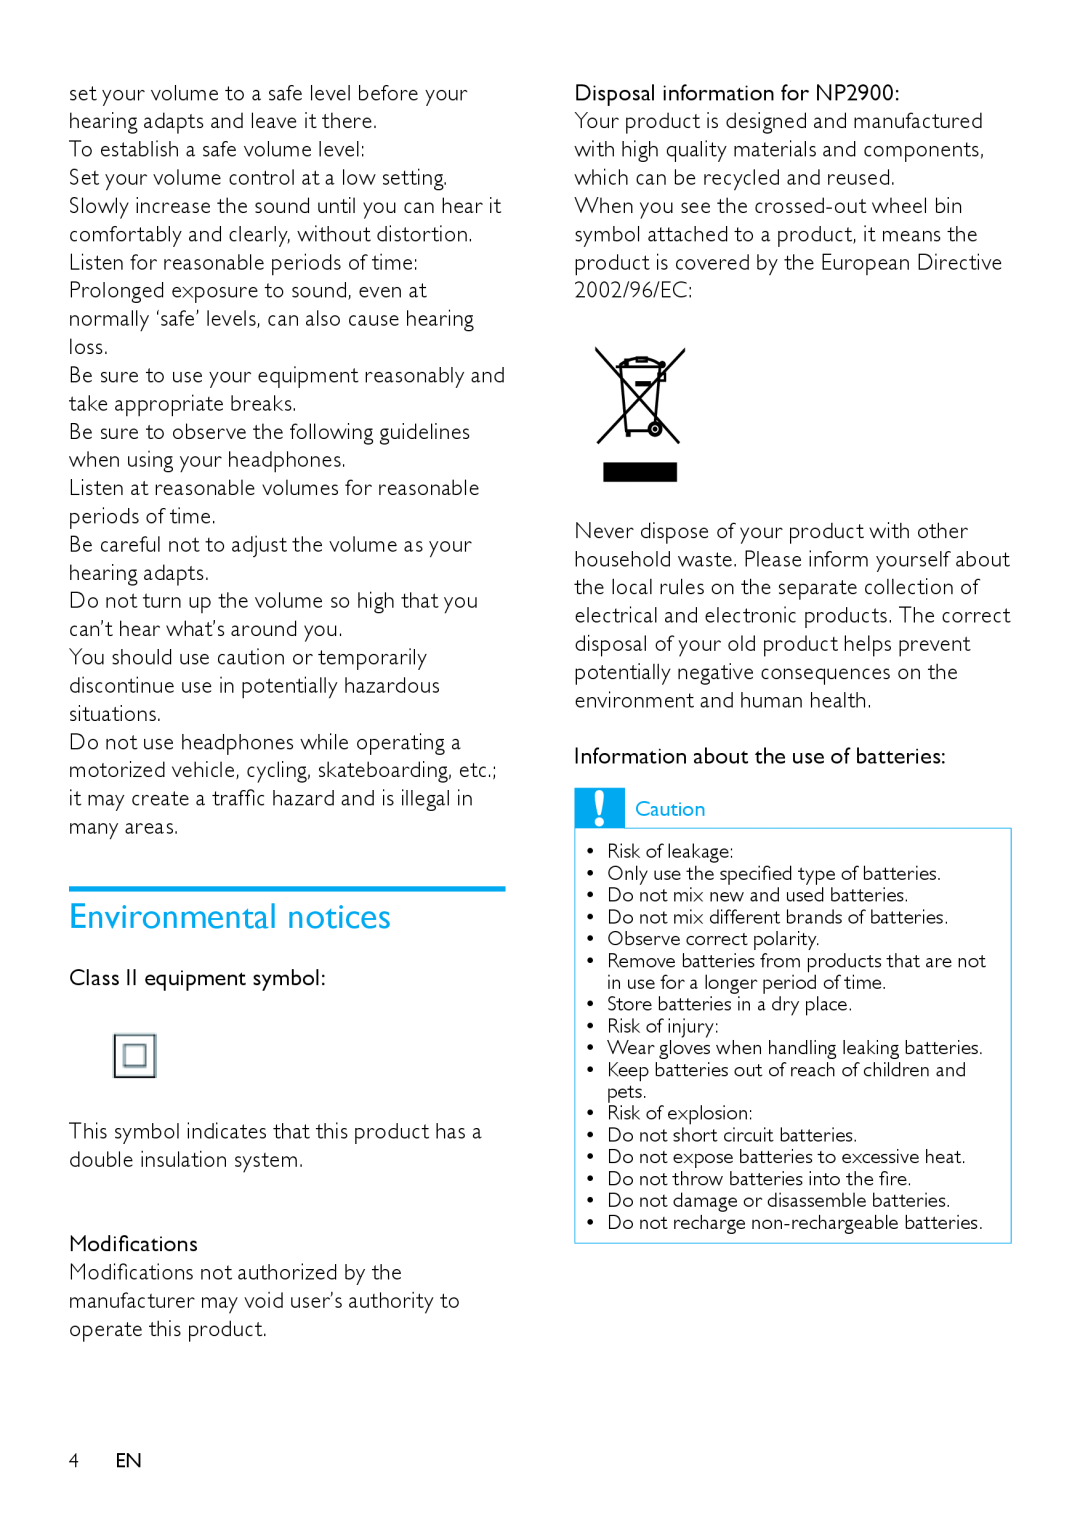 Philips NP2900 user manual Environmental notices 